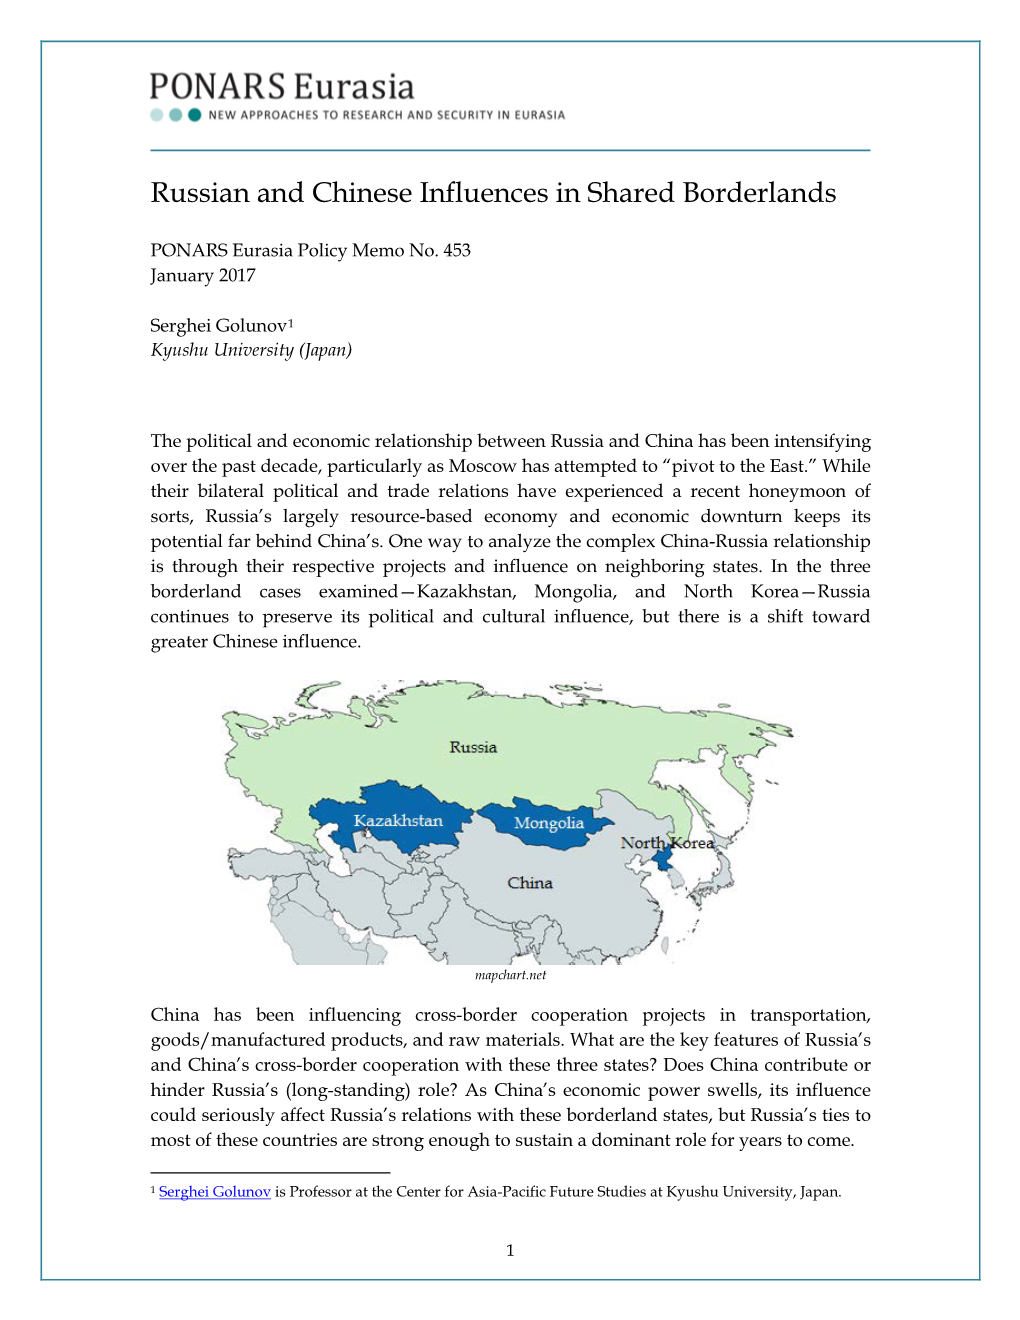 Russian and Chinese Influences in Shared Borderlands